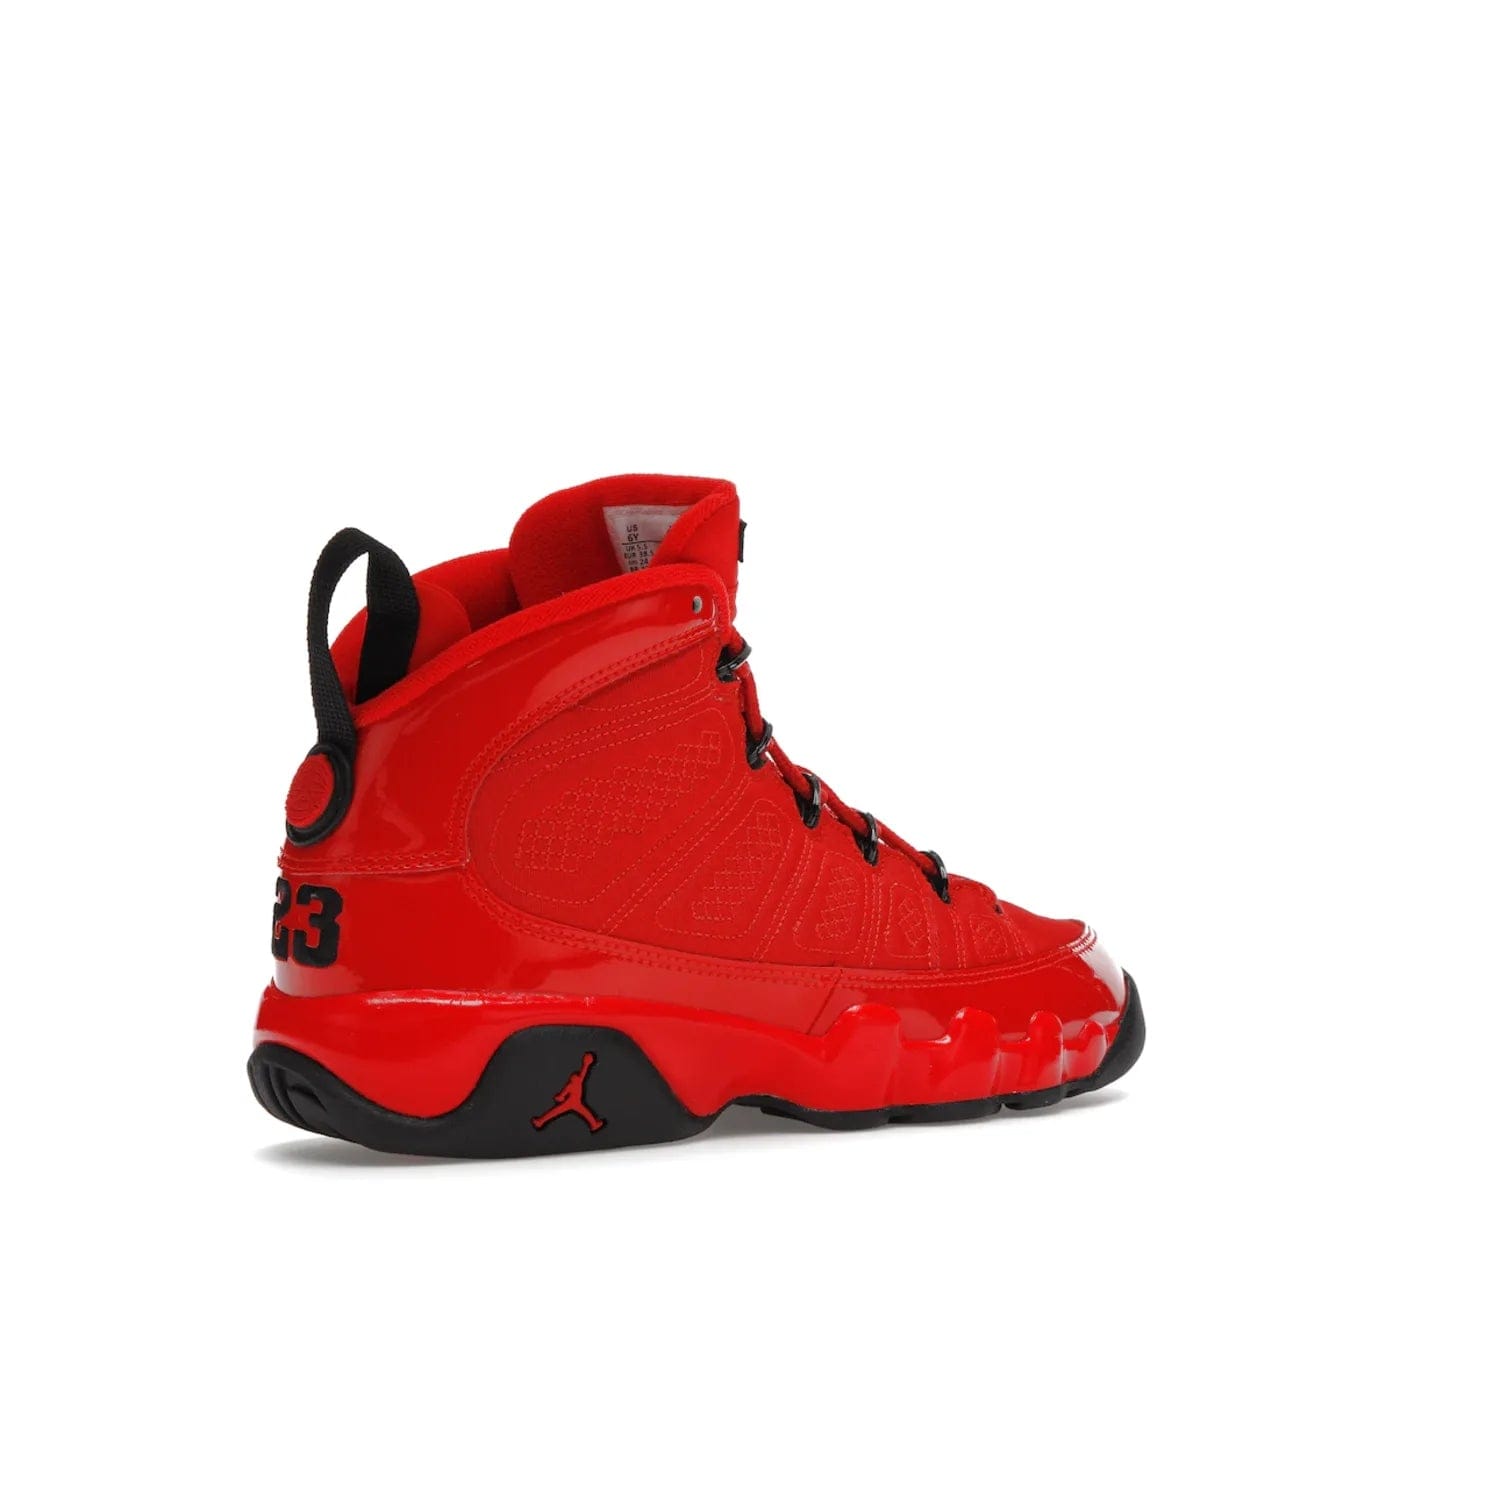 Jordan 9 Retro Chile Red (GS) - Image 33 - Only at www.BallersClubKickz.com - Introducing the Air Jordan 9 Retro Chile Red (GS), a vintage 1993 silhouette with fiery colorway. Features quilted side paneling, glossy patent leather, pull tabs, black contrast accents, and foam midsole. Launching May 2022 for $140.